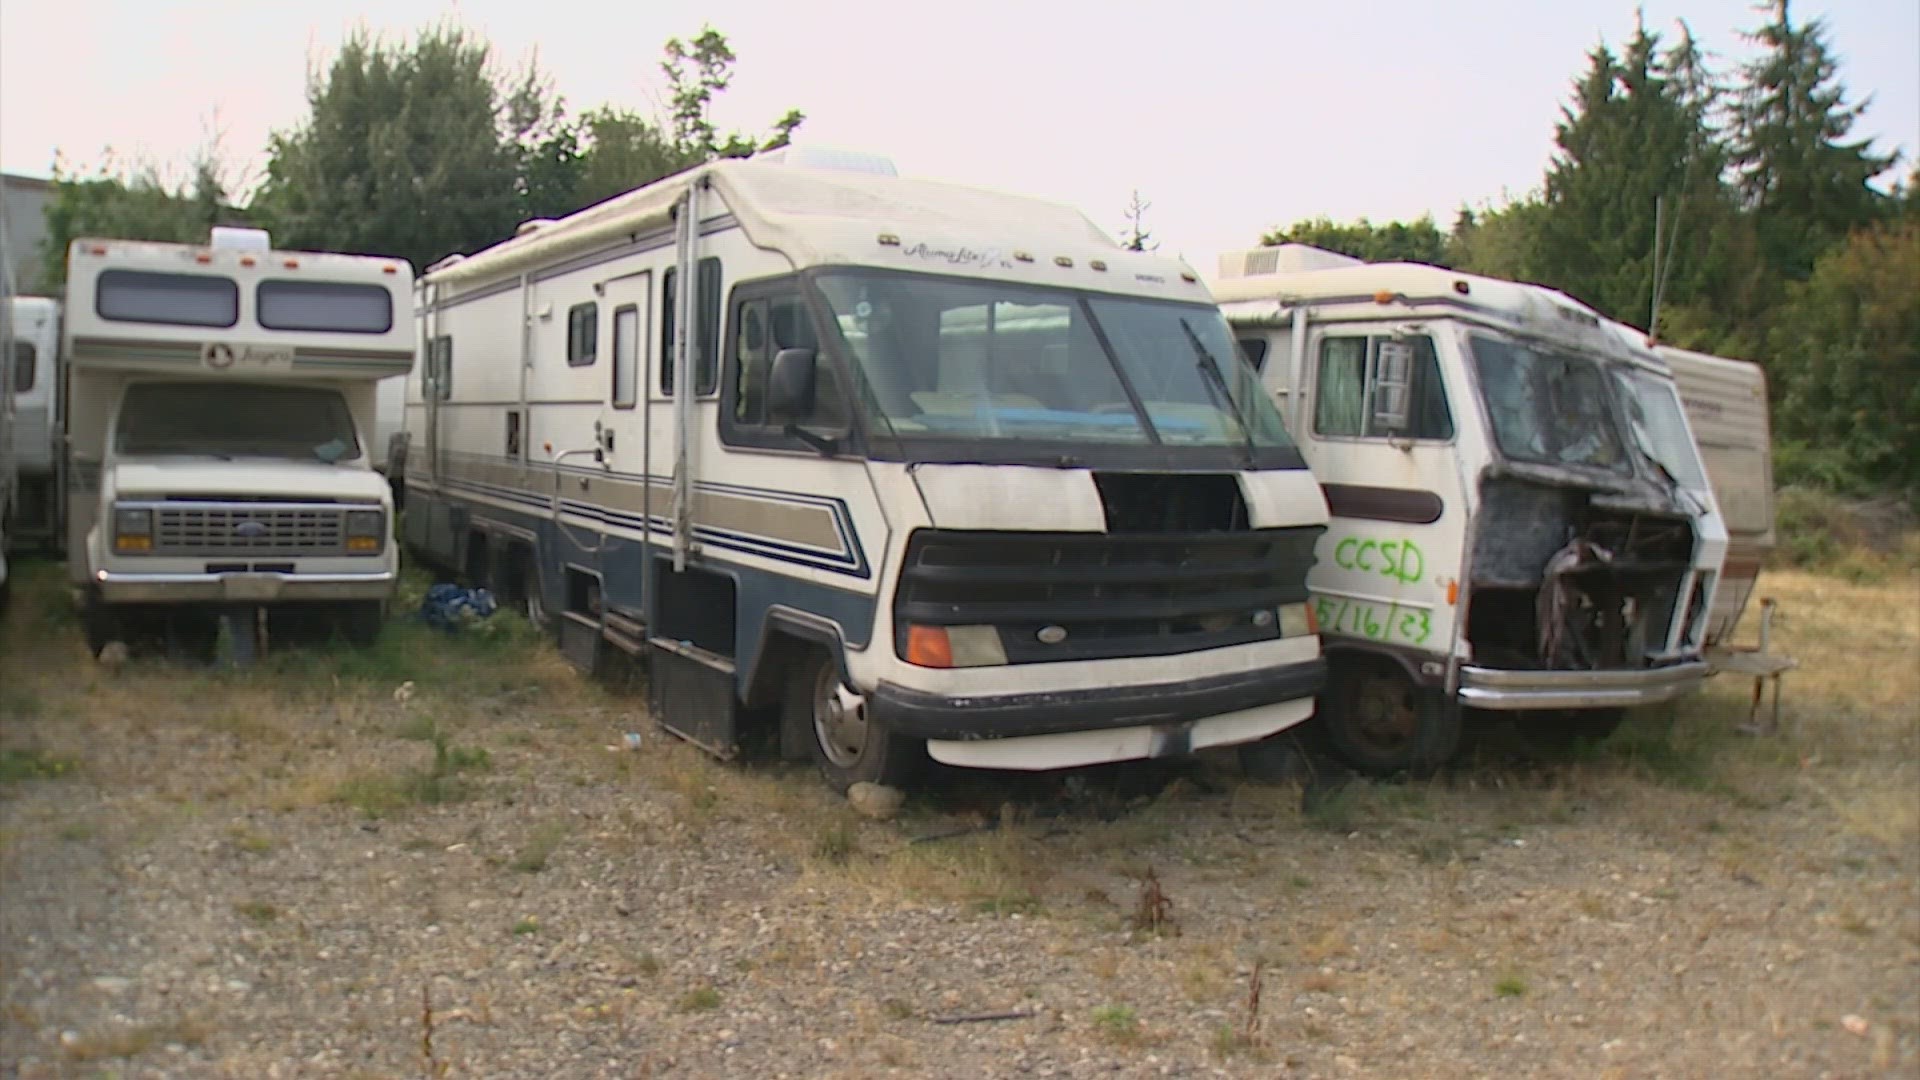 Additional storage for derelict RVs is expected to open in Port Angeles in the next few months as the city grapples with an overwhelming number of impounded cars.